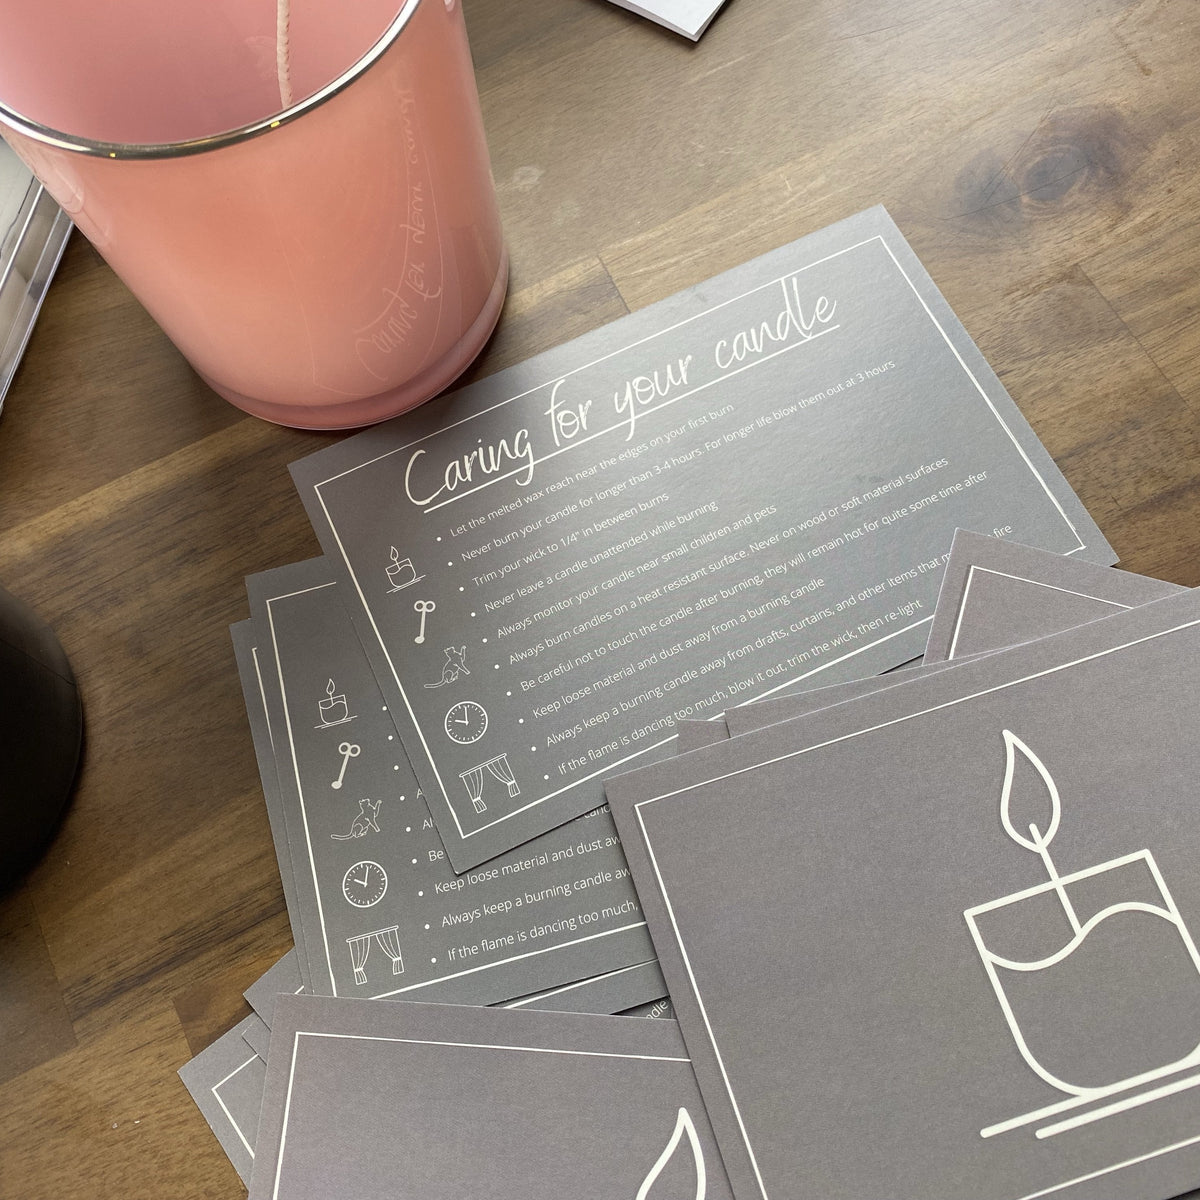 Printed Candle Care Cards | 100